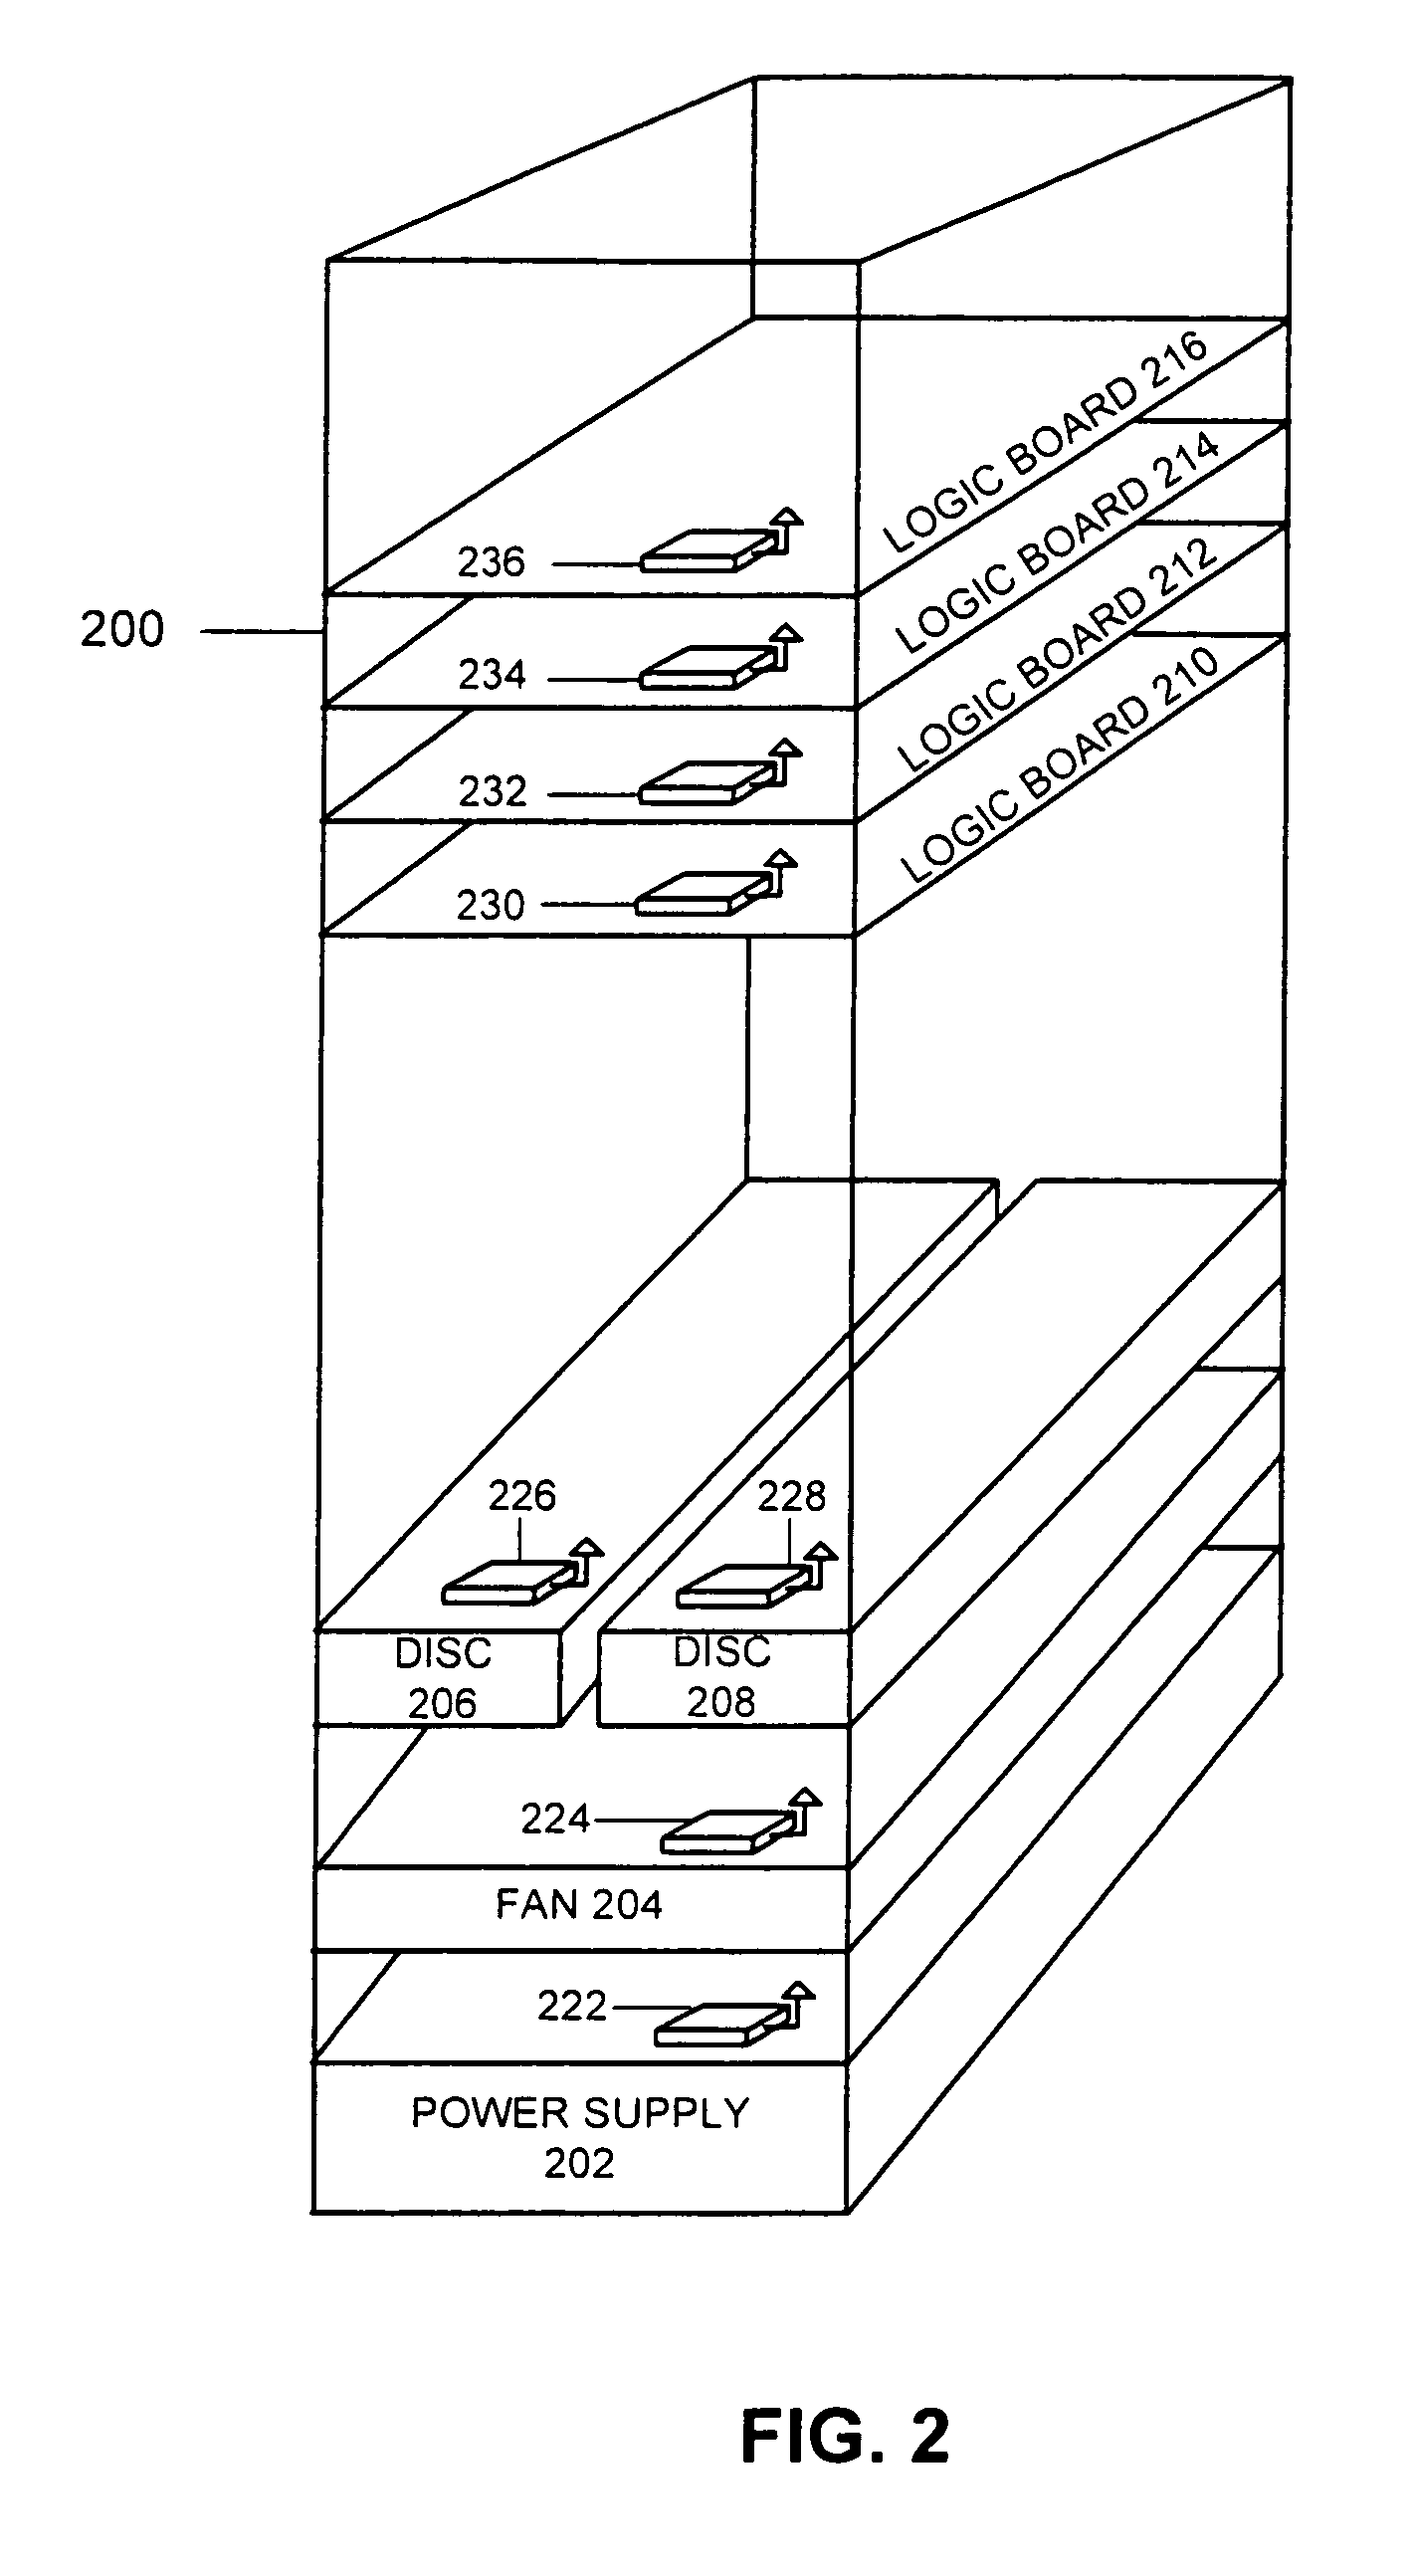 Method and apparatus for wirelessly testing field-replaceable units (FRUs)